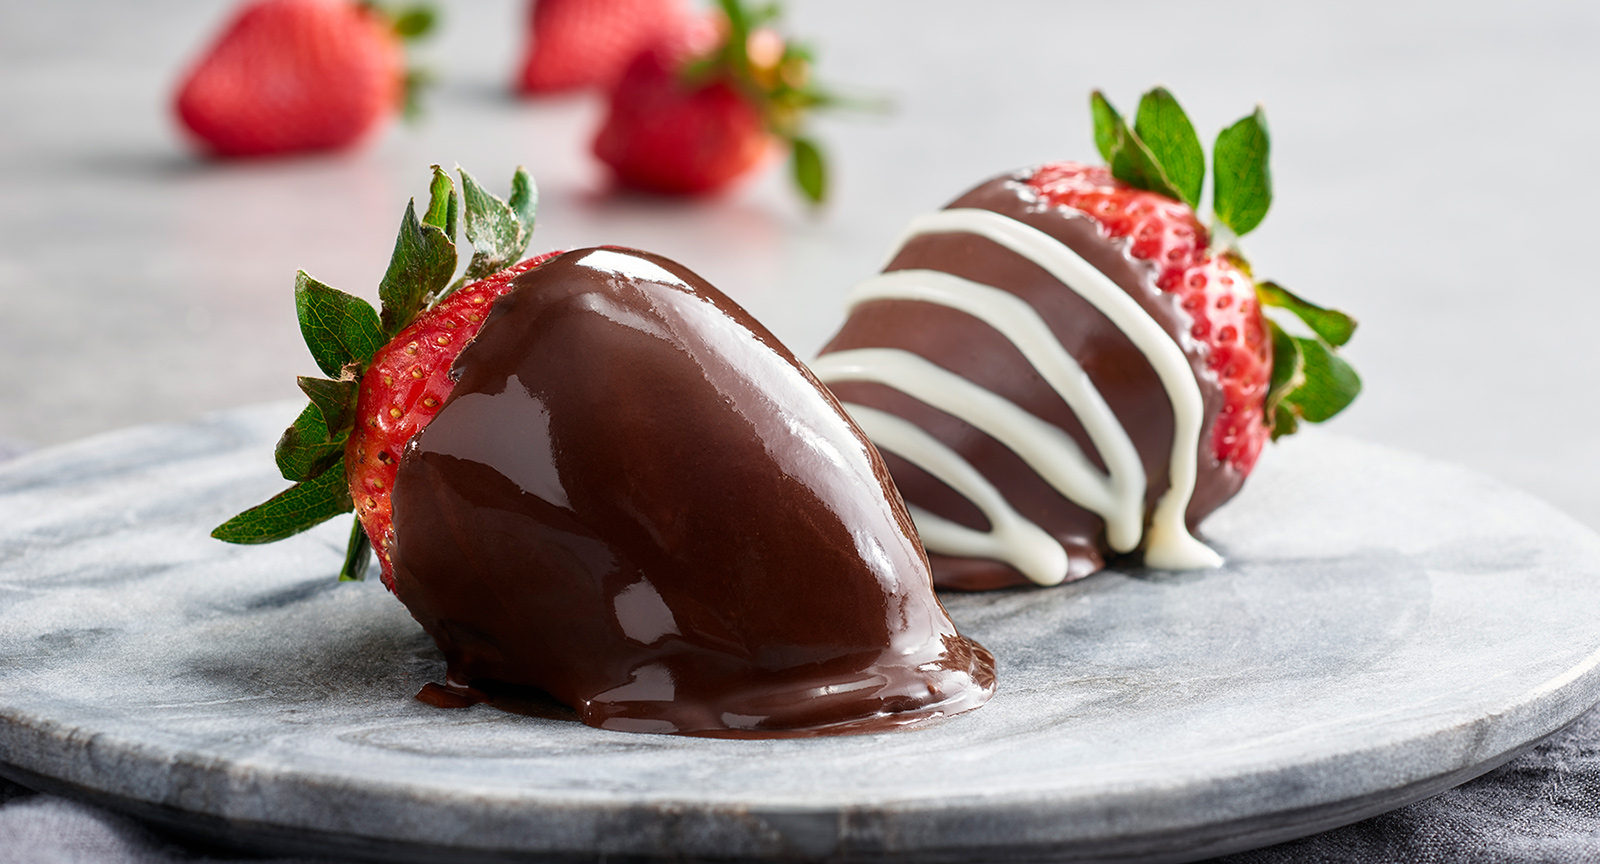 Signature Dipped Strawberries at the Melting Pot Restaurant